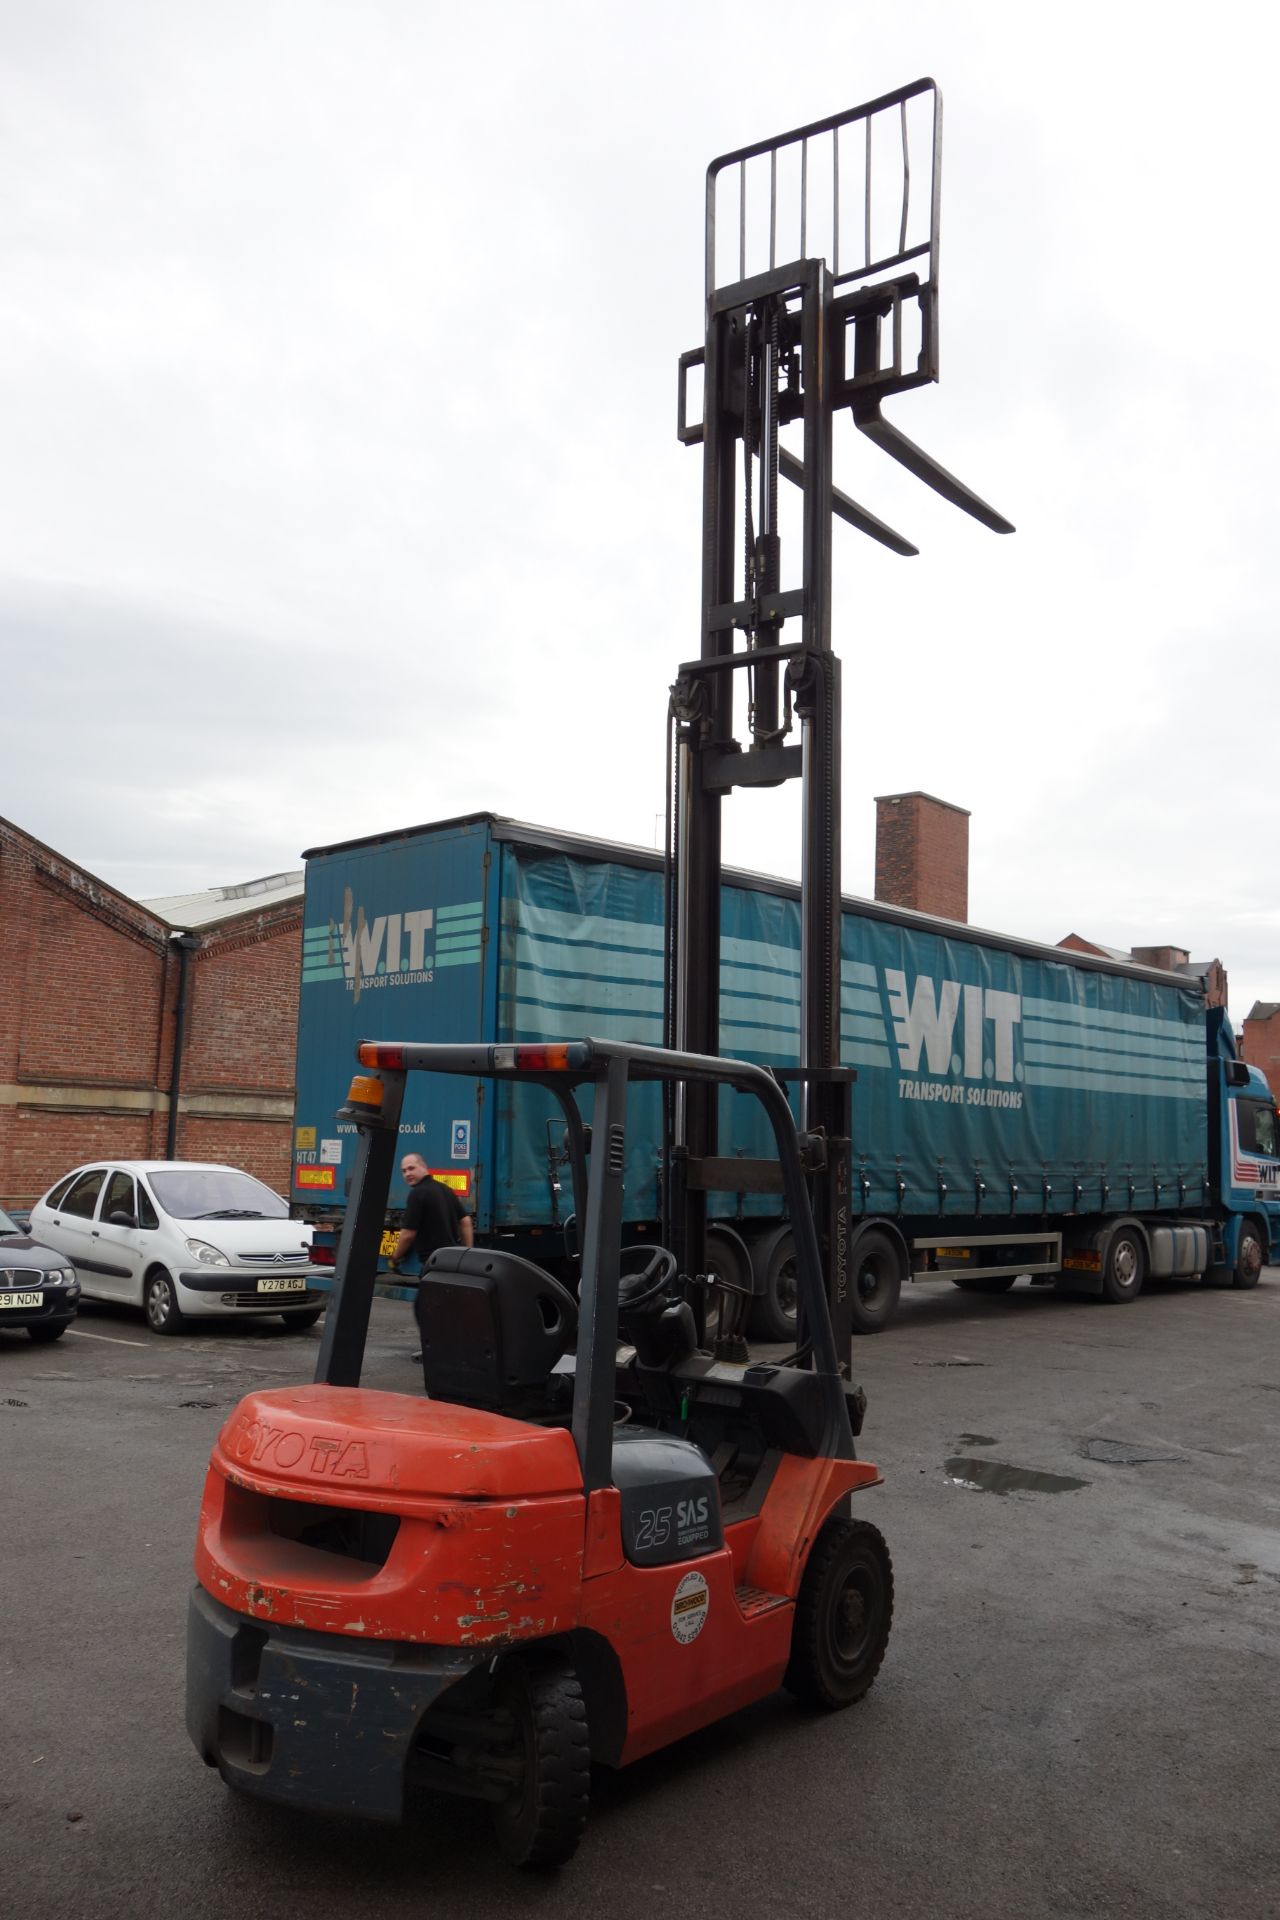 2003 Toyota 25 2.5 Tonne Diesel Forklift Truck. Max lift height. 4.1m. Side Shift. Full Working - Image 3 of 8